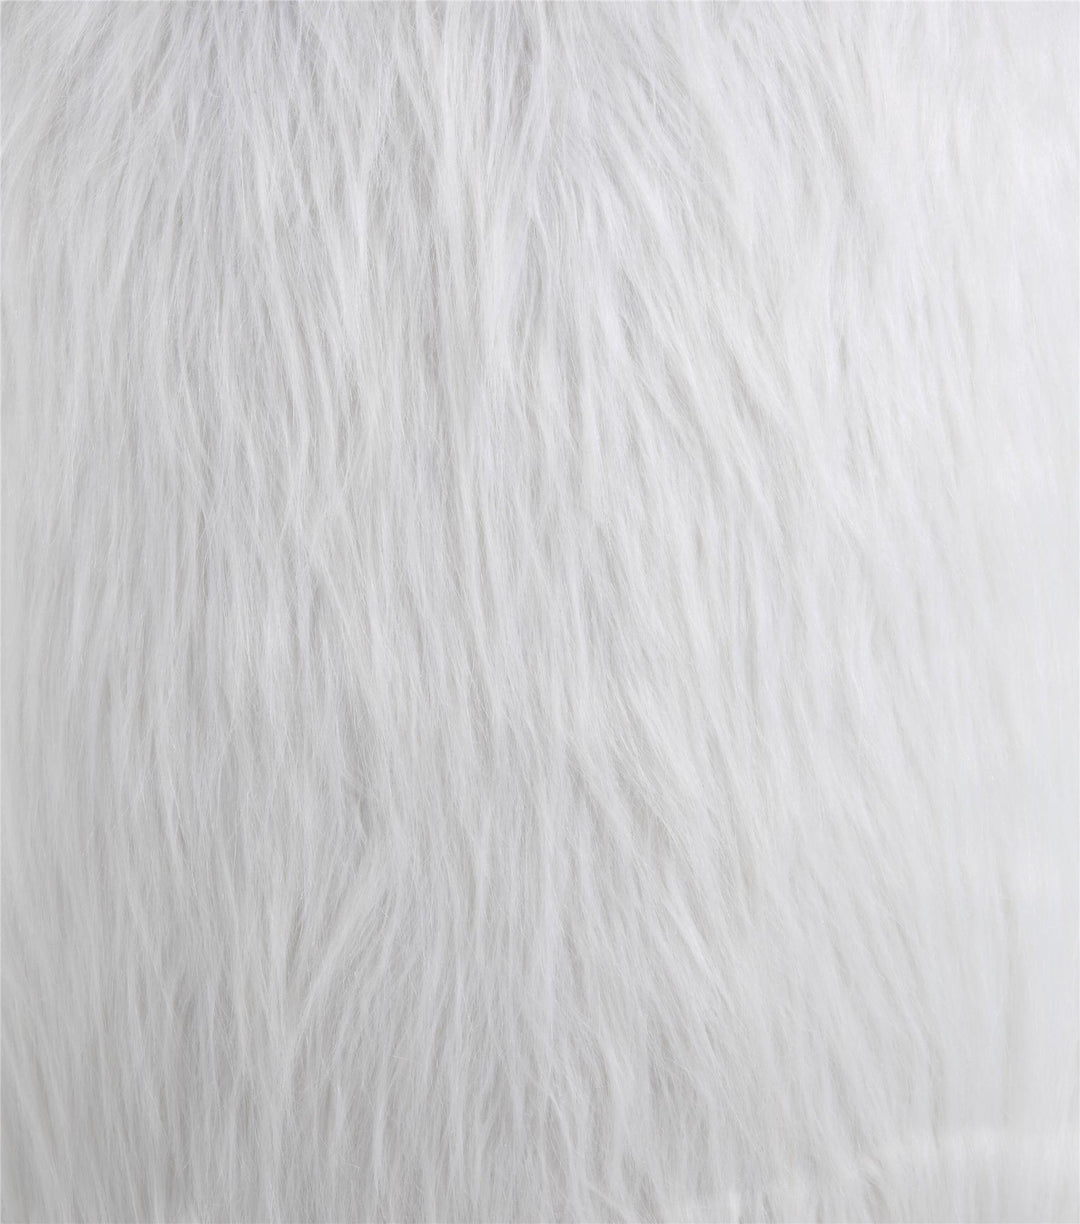 Furry Office Chair with Padded Back - White